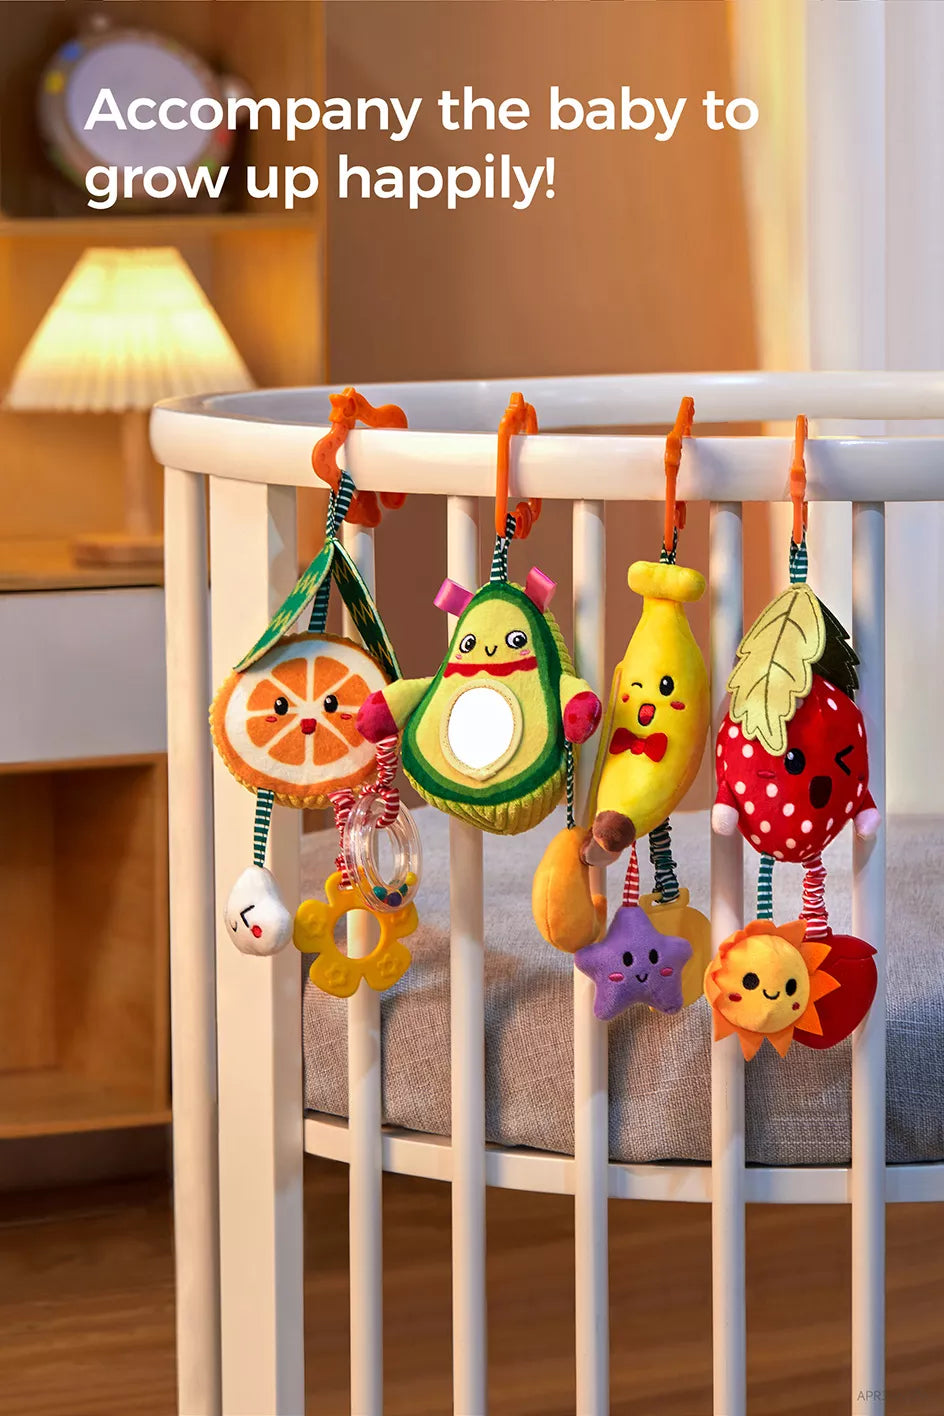 Baby toy hanging fruit rattle hanging from stroller